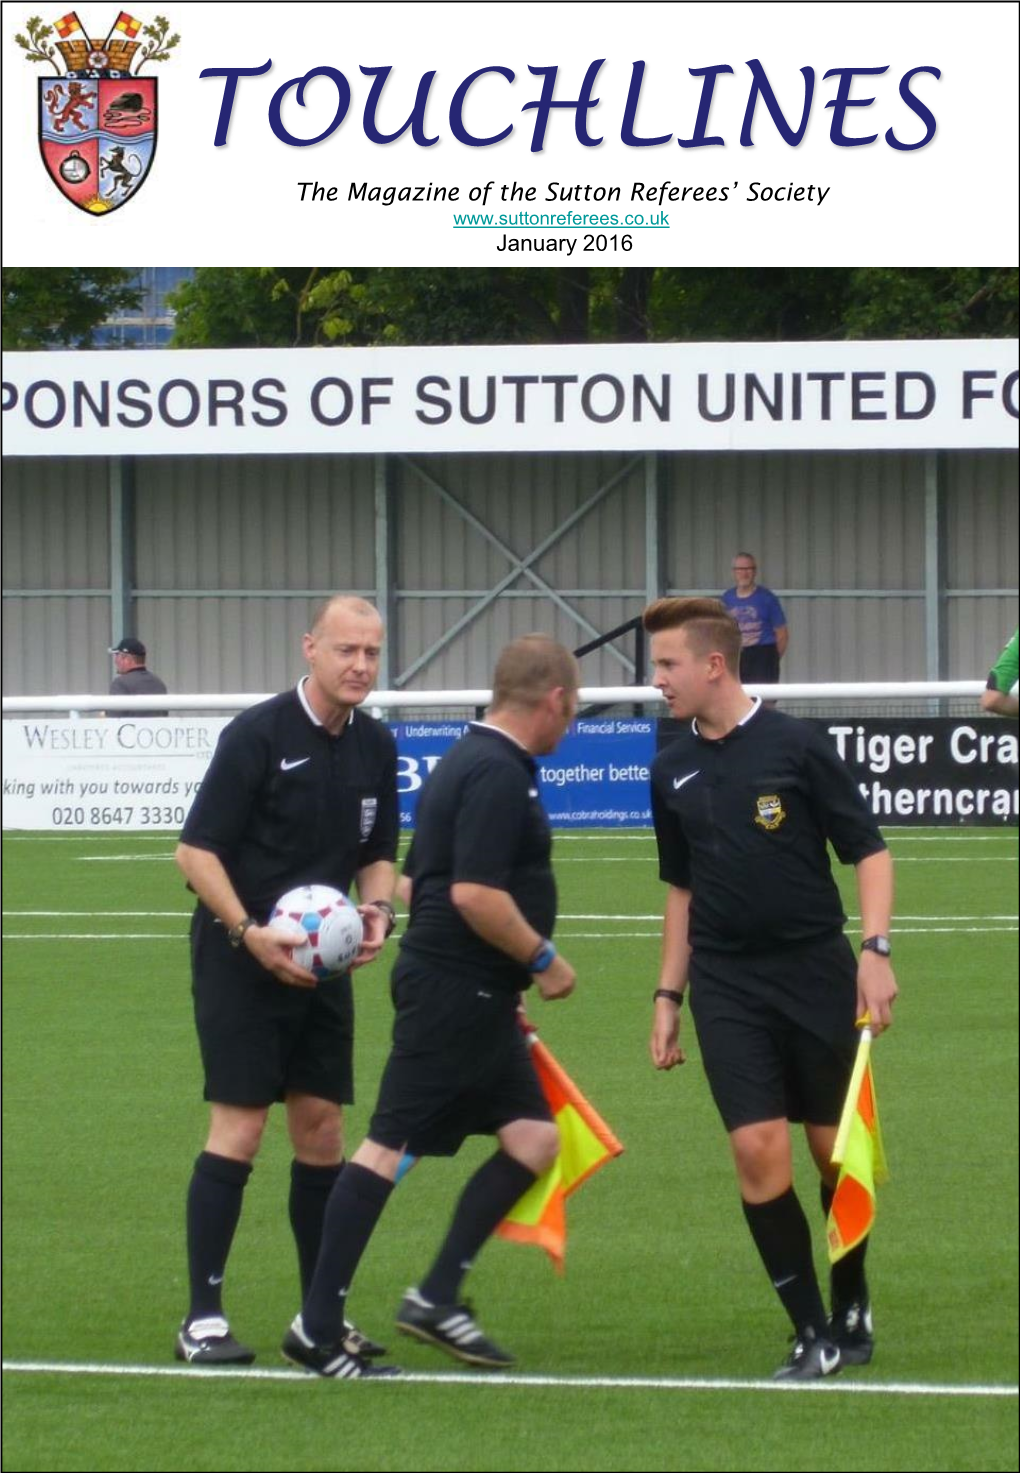 TOUCHLINES the Magazine of the Sutton Referees’ Society January 2016